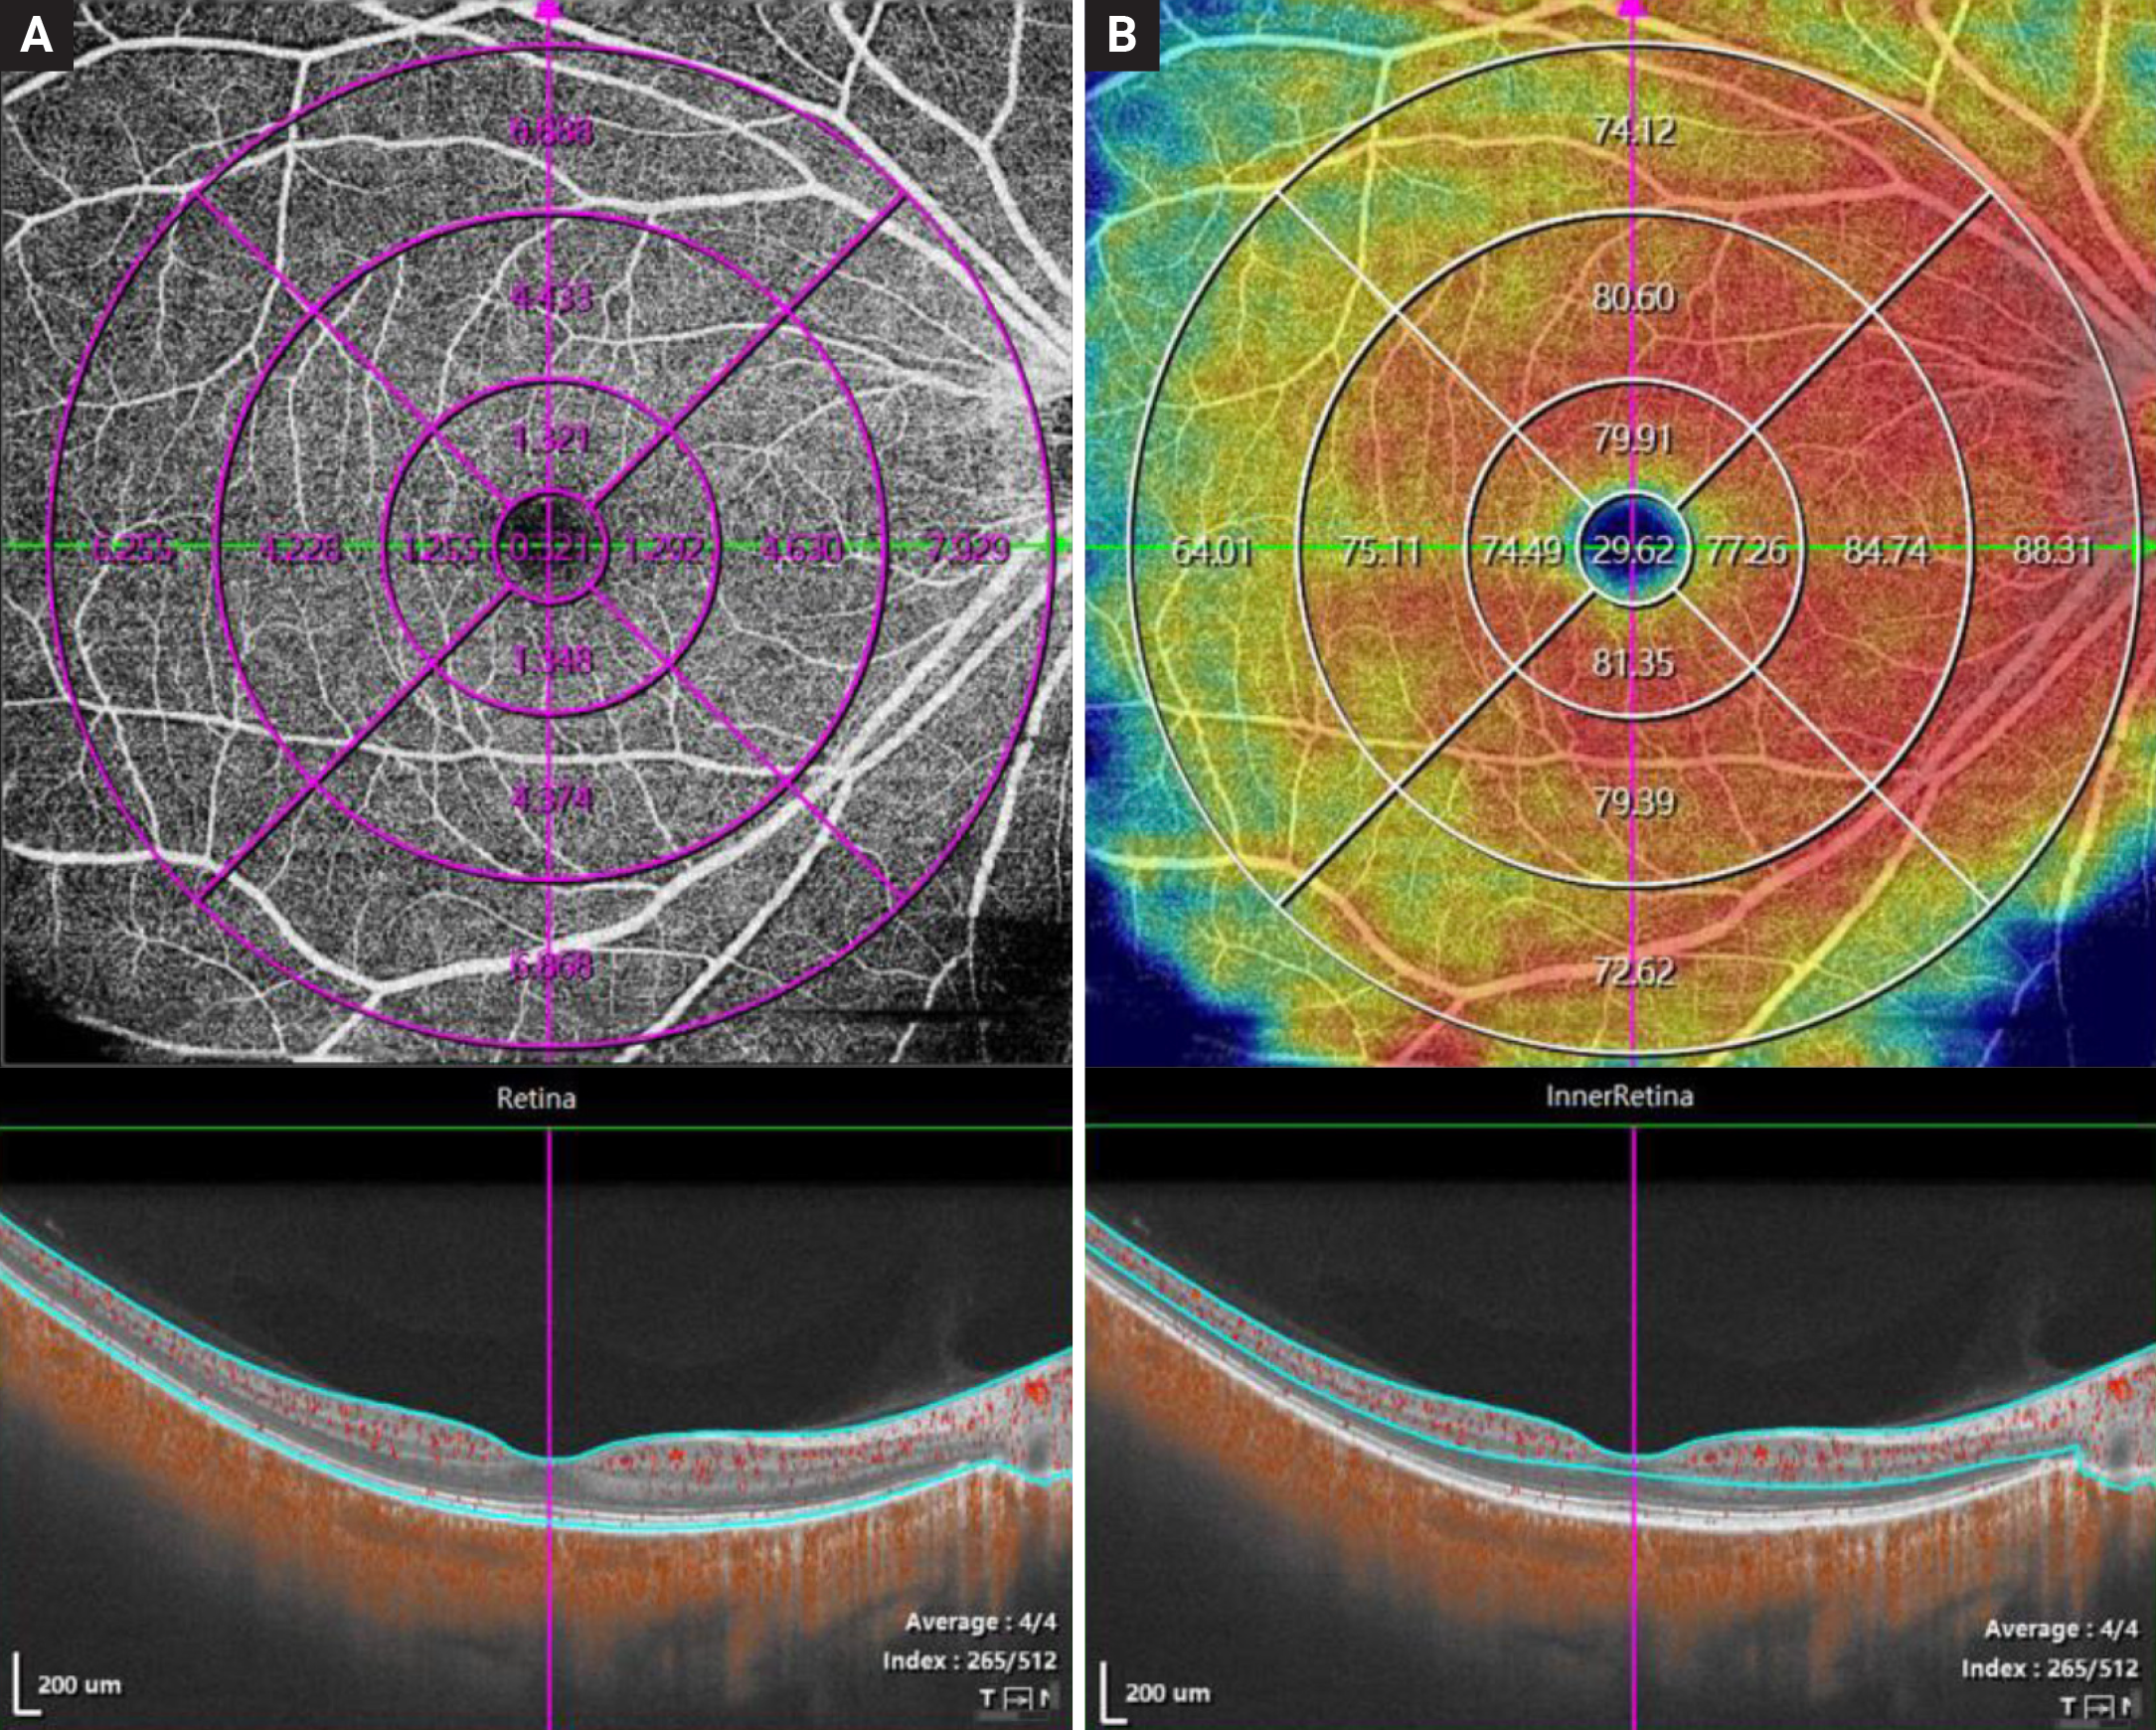 This study was able to correlate changes in flow area (A) and vessel density (B) on OCT-A with fundus changes on ultra-widefield imaging in myopes with varying disease severities.